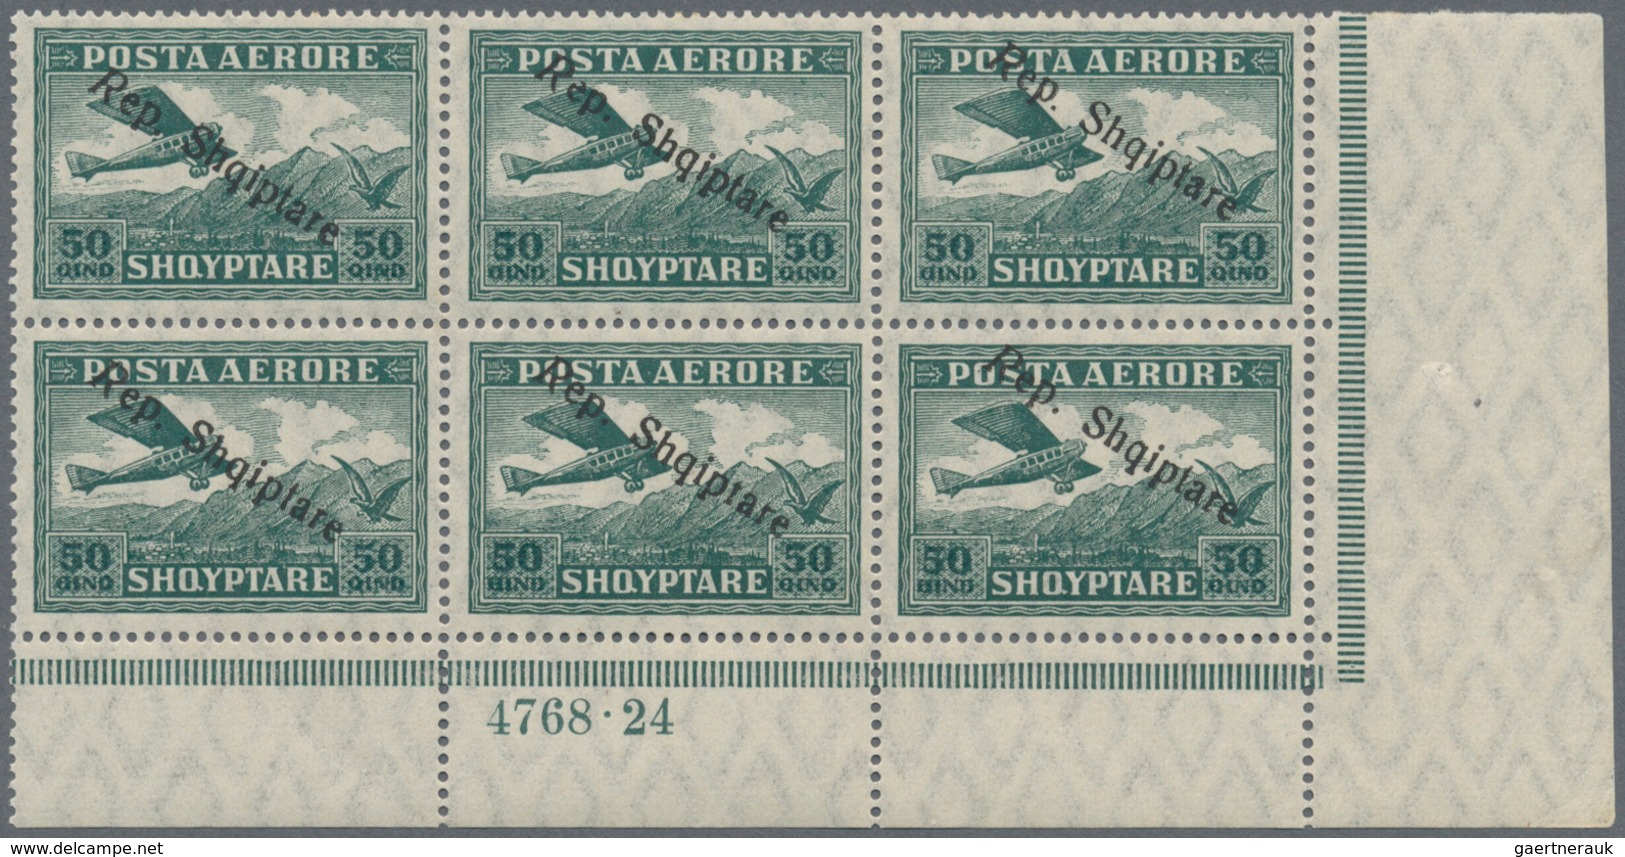 Albanien: 1927, 50 Q, 1 F And 2 F Airmail Stamps With Ovp "Rep.Shqiptare", Three Lower Right Corner - Albanië